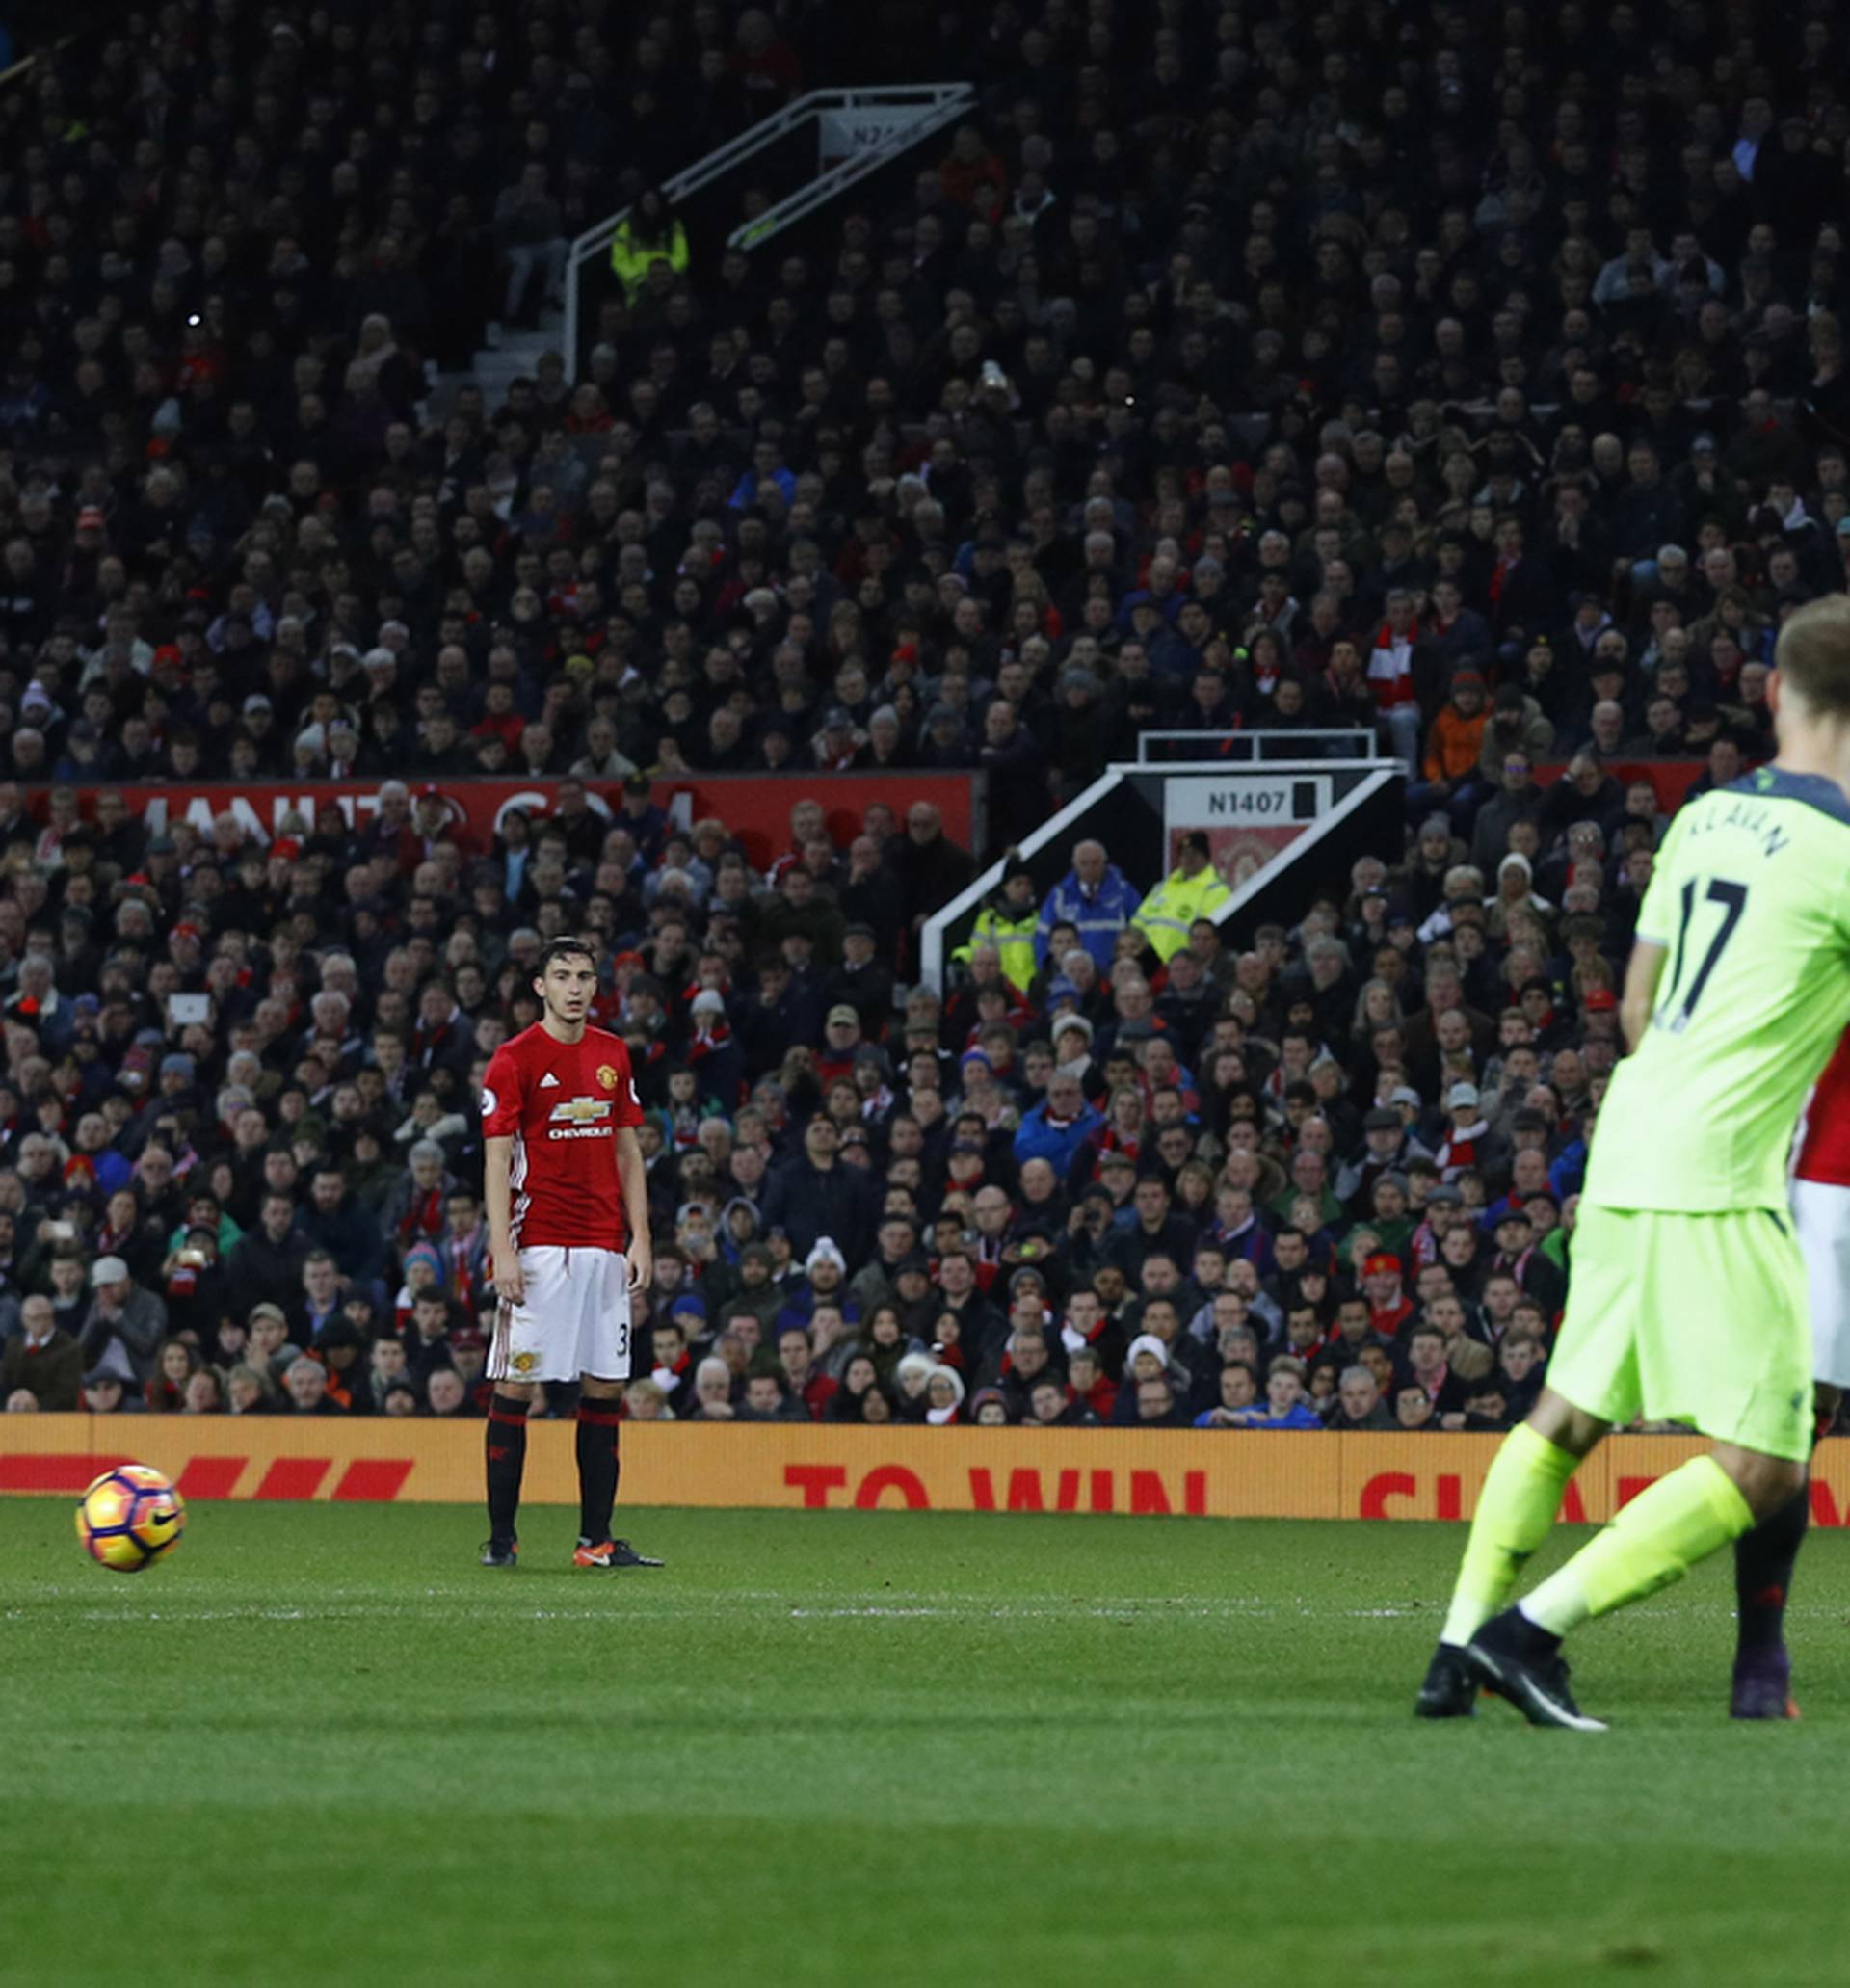 Manchester United's Zlatan Ibrahimovic shoots from a free kick